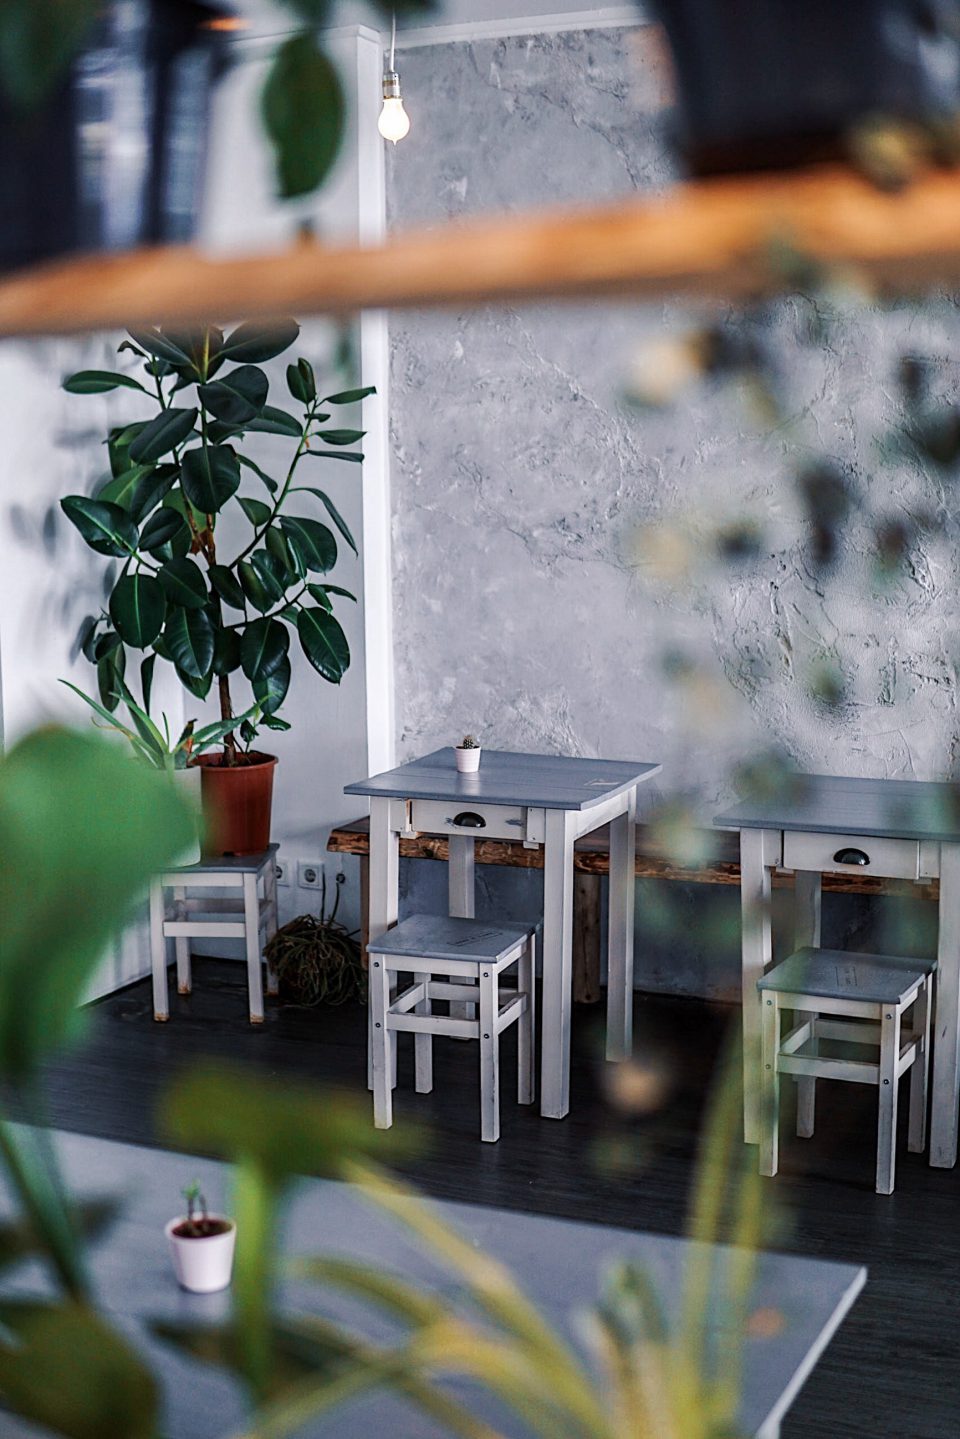 9 PLACES TO IMMERSE YOURSELF IN PLANTS IN BERLIN